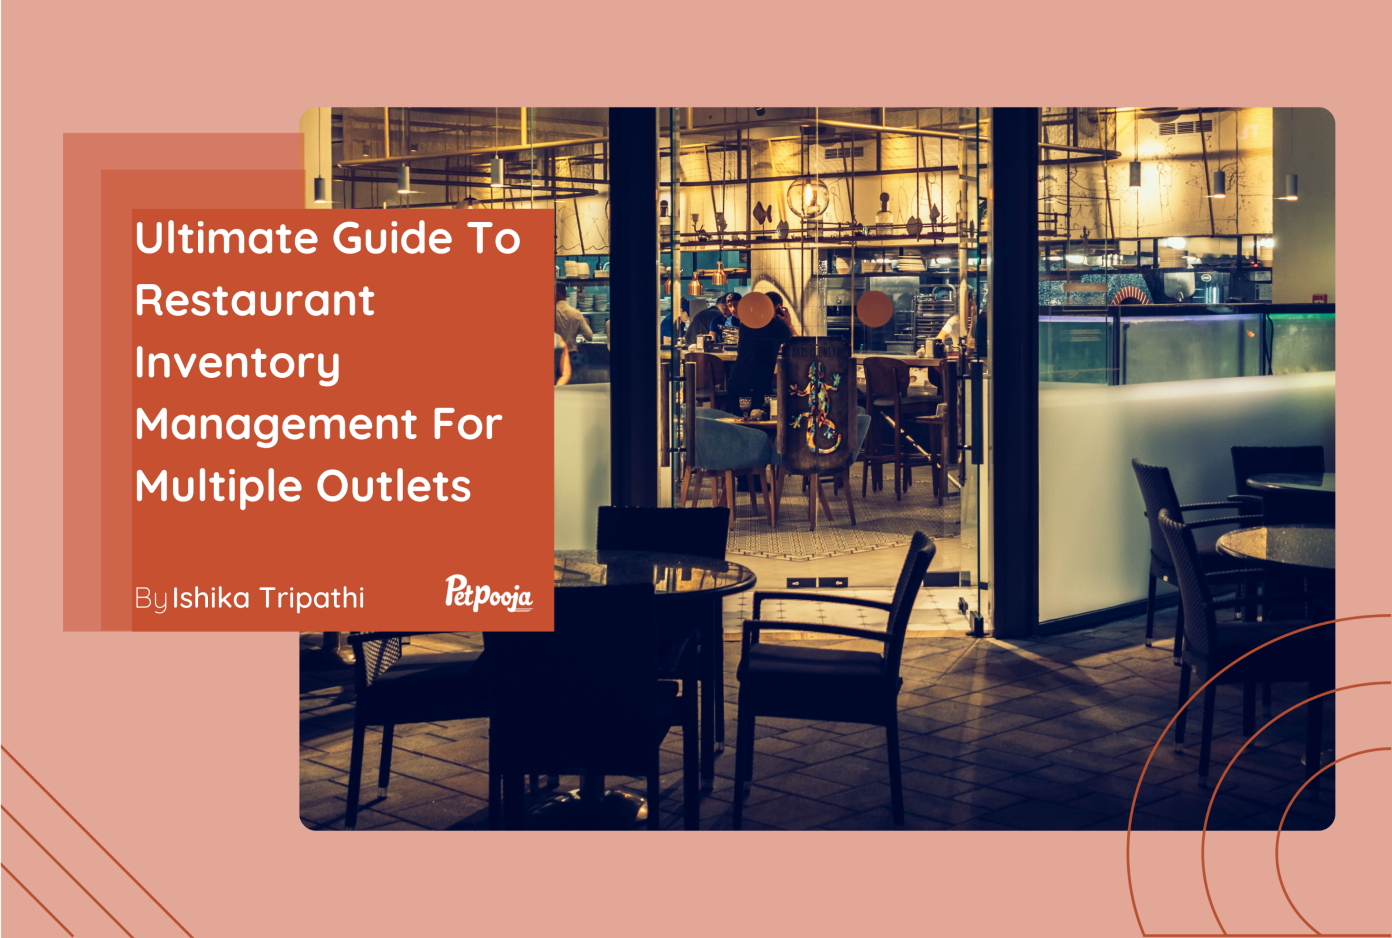 Ultimate Guide To Restaurant Inventory Management For Multiple Outlets